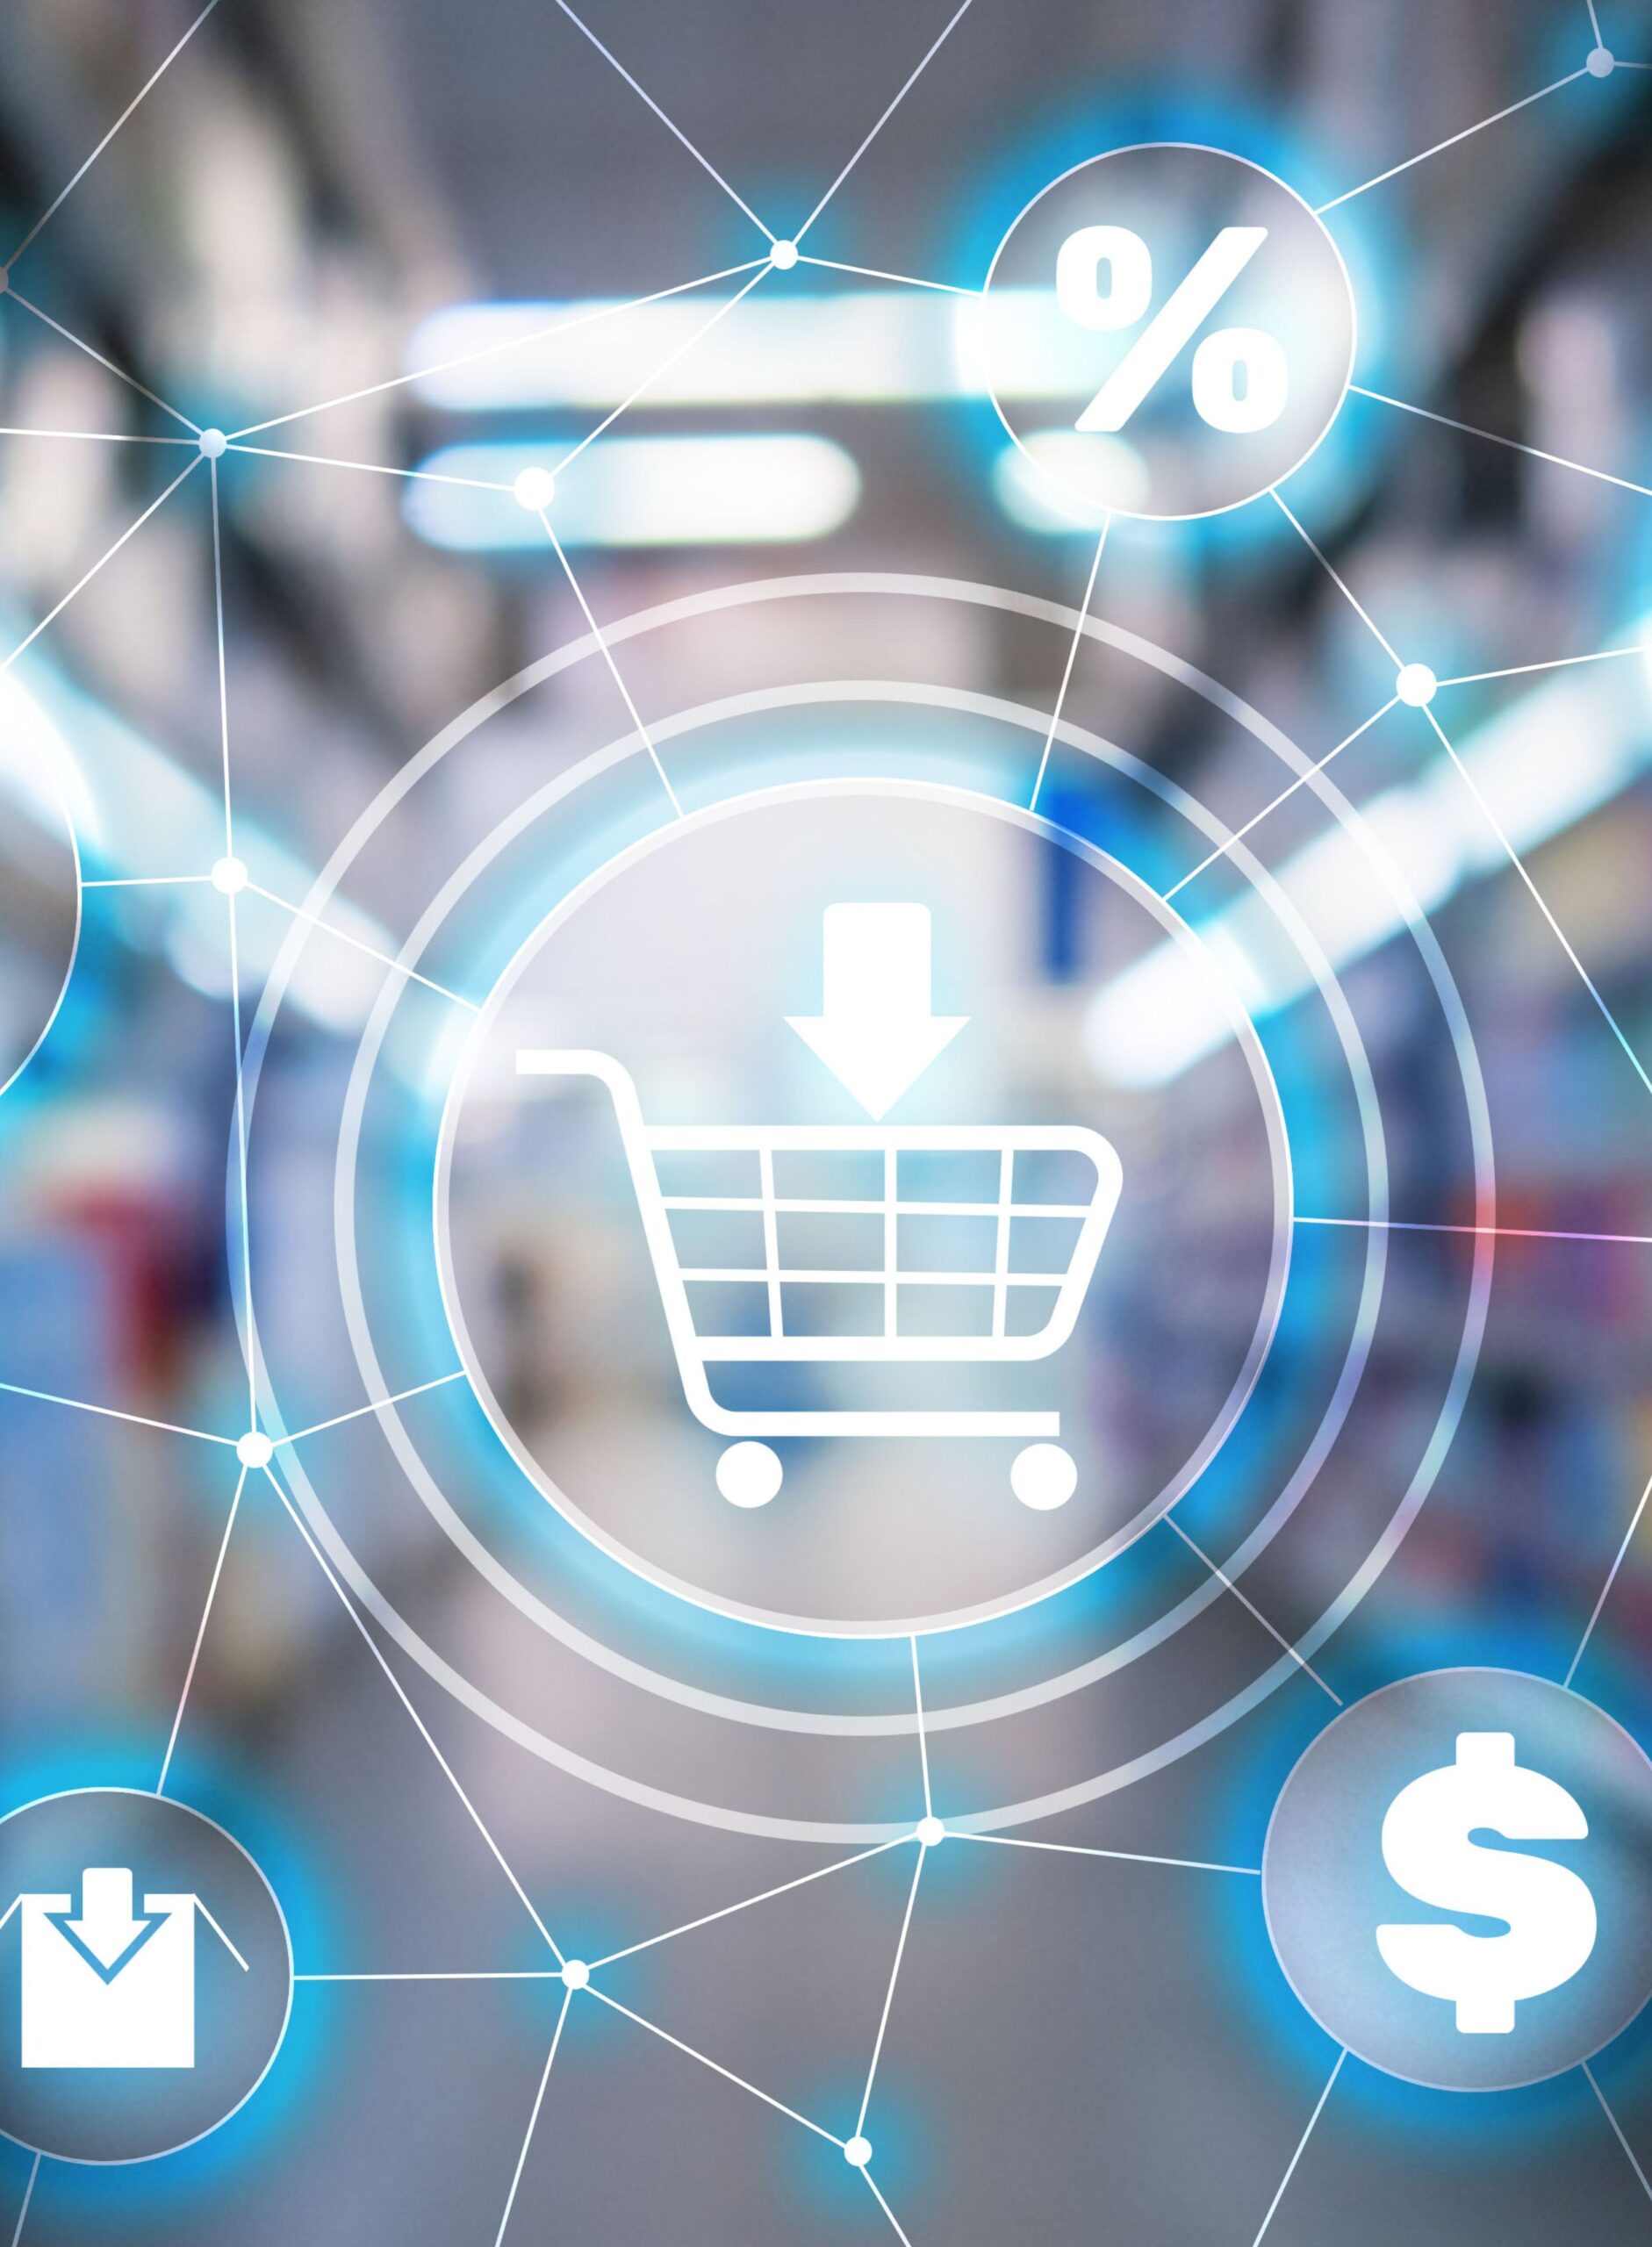 Illustration of interconnected ecommerce elements: shopping cart, dollar sign, email icon, and percent sign symbolizing outsourcing benefits.